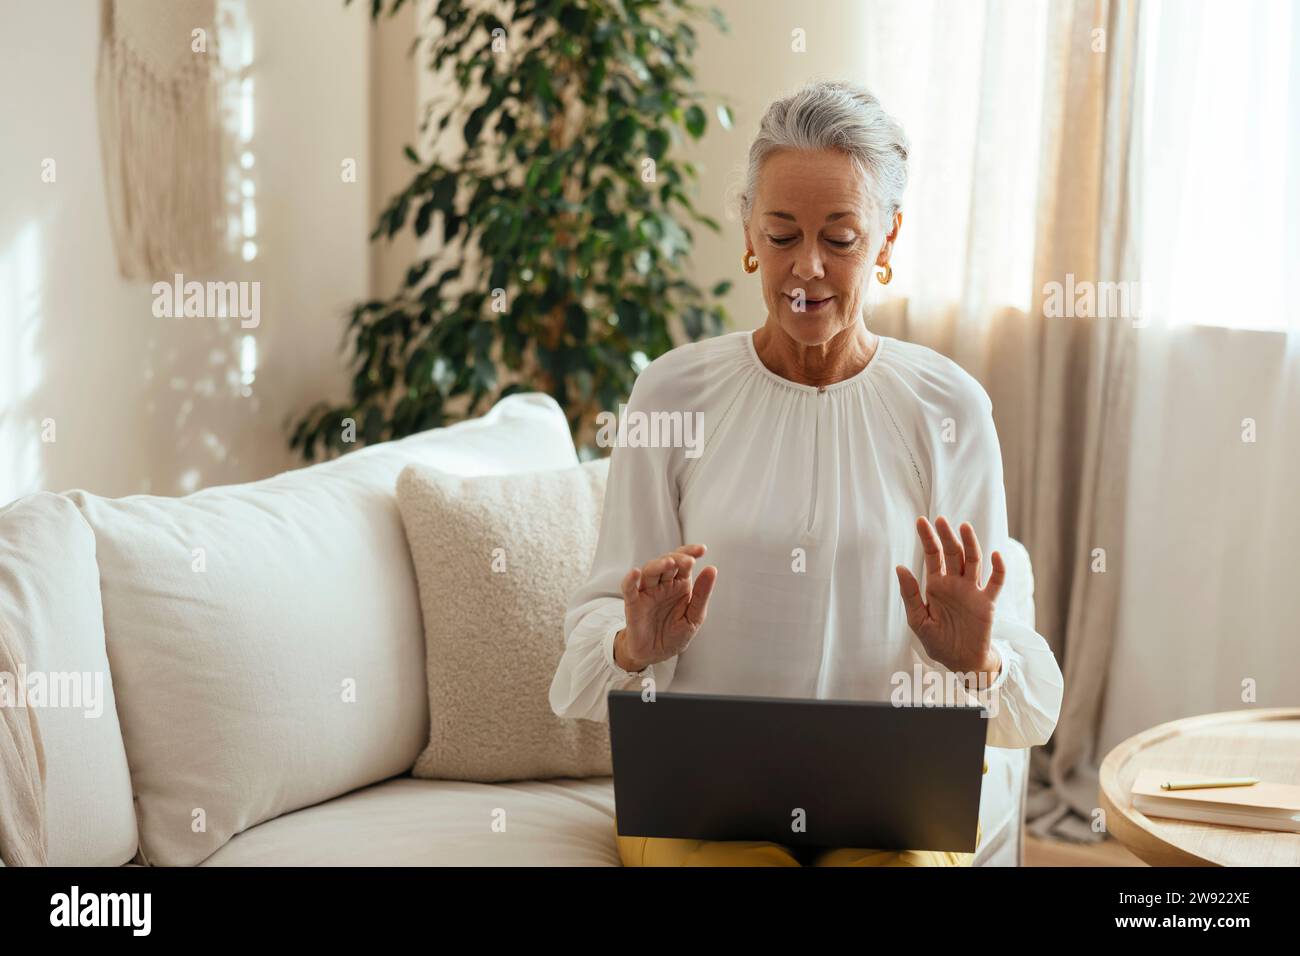 Psychologist having consultation meeting on video call through laptop at home Stock Photo